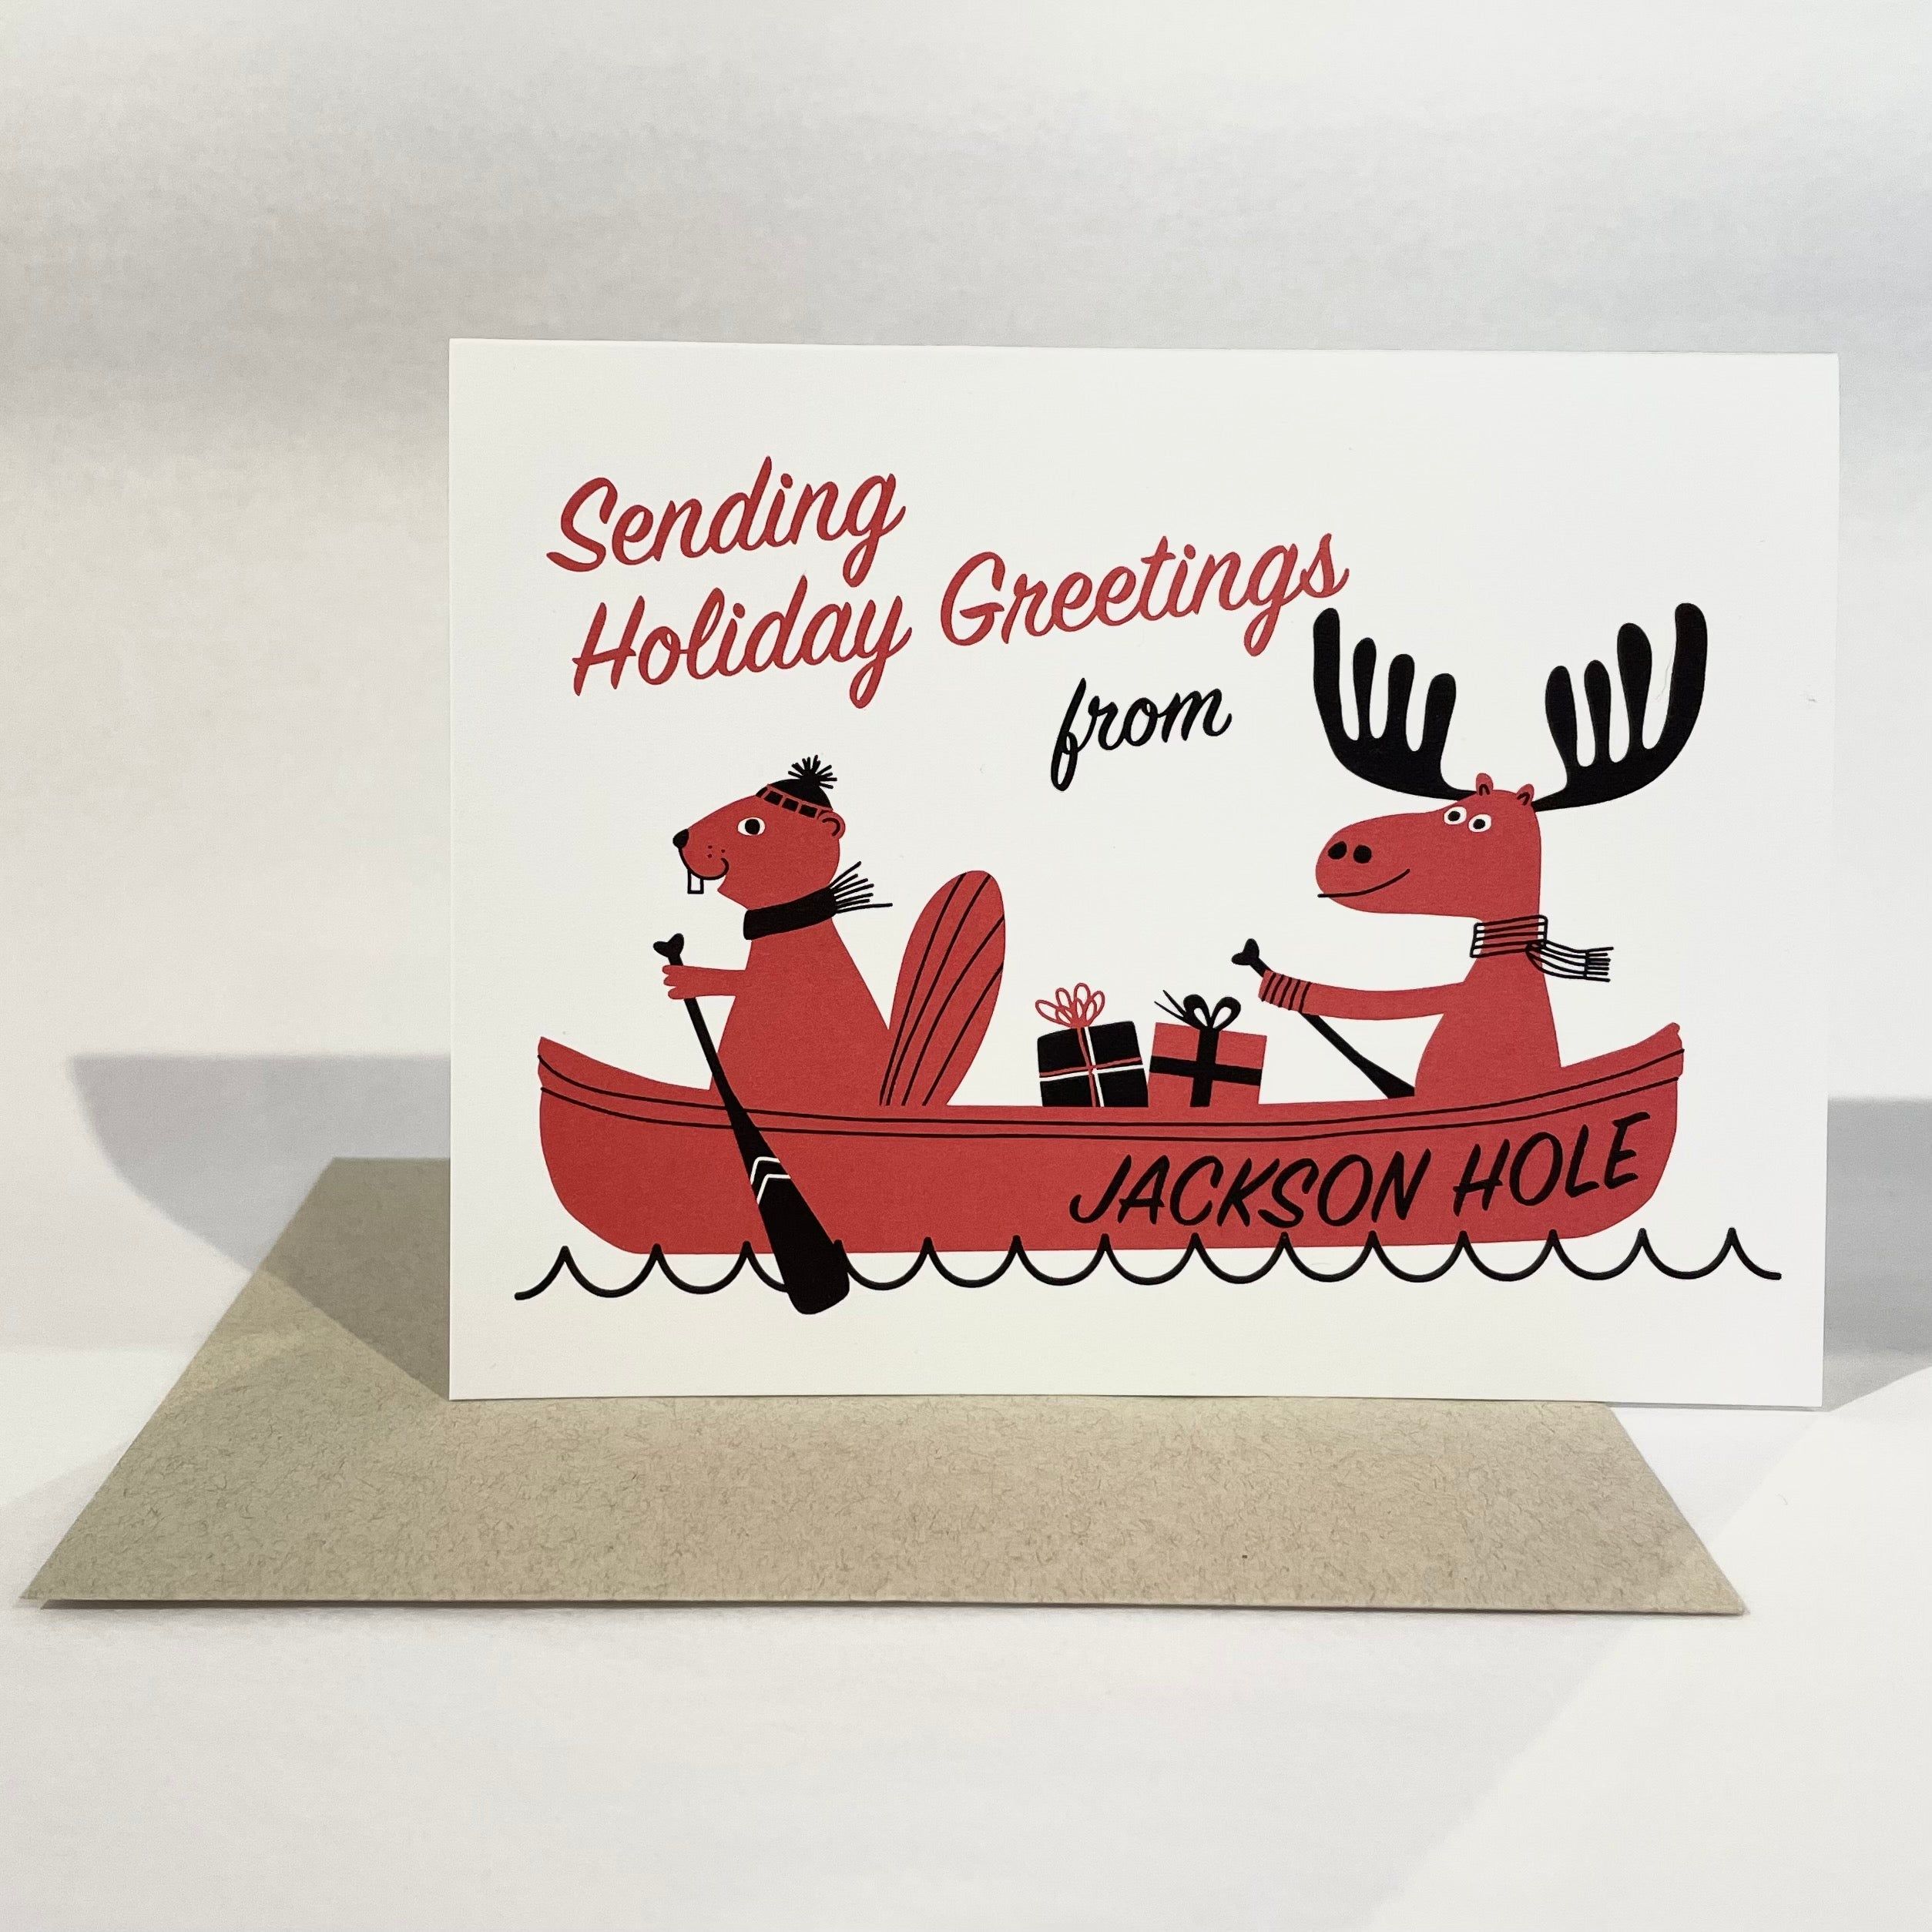 Holiday Greetings from Jackson Hole Card